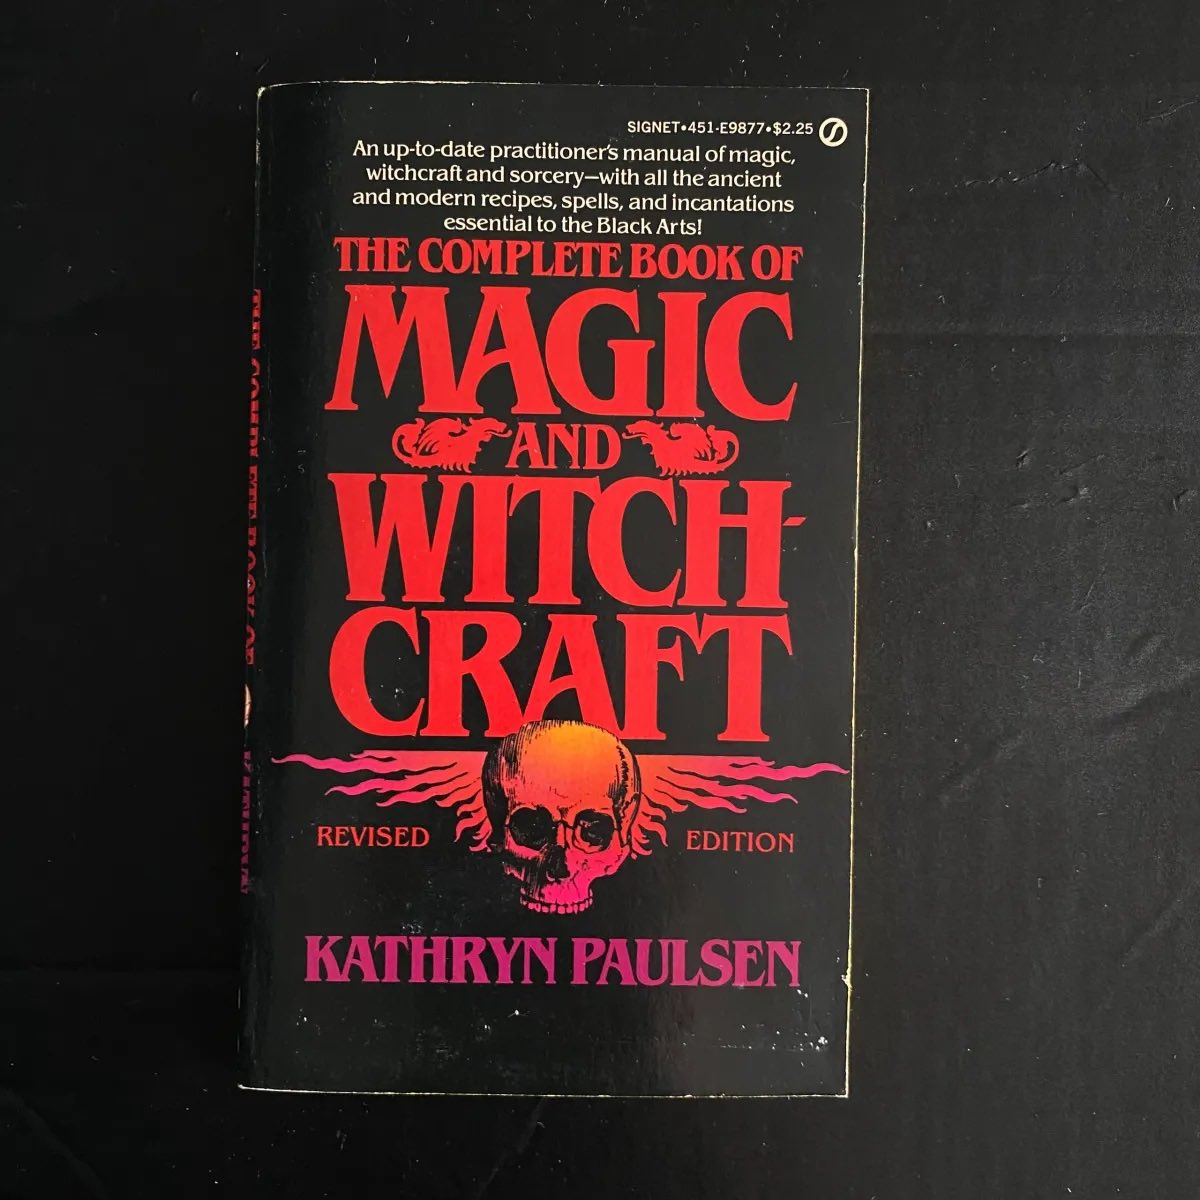 Super scarce edition 🔥 

alldatalostbooks.co.uk/shop-1/ols/pro…

#alldatalostbooks #occult #occultbooks #occultism #satanism #paganism #occultbookseller #witchcraft  #montaguesummers #witchcraftbooks #traditionalwitch #witchyvibes #witchybooks #goldendawn #ukbookstagram #bookworm #blackmagic